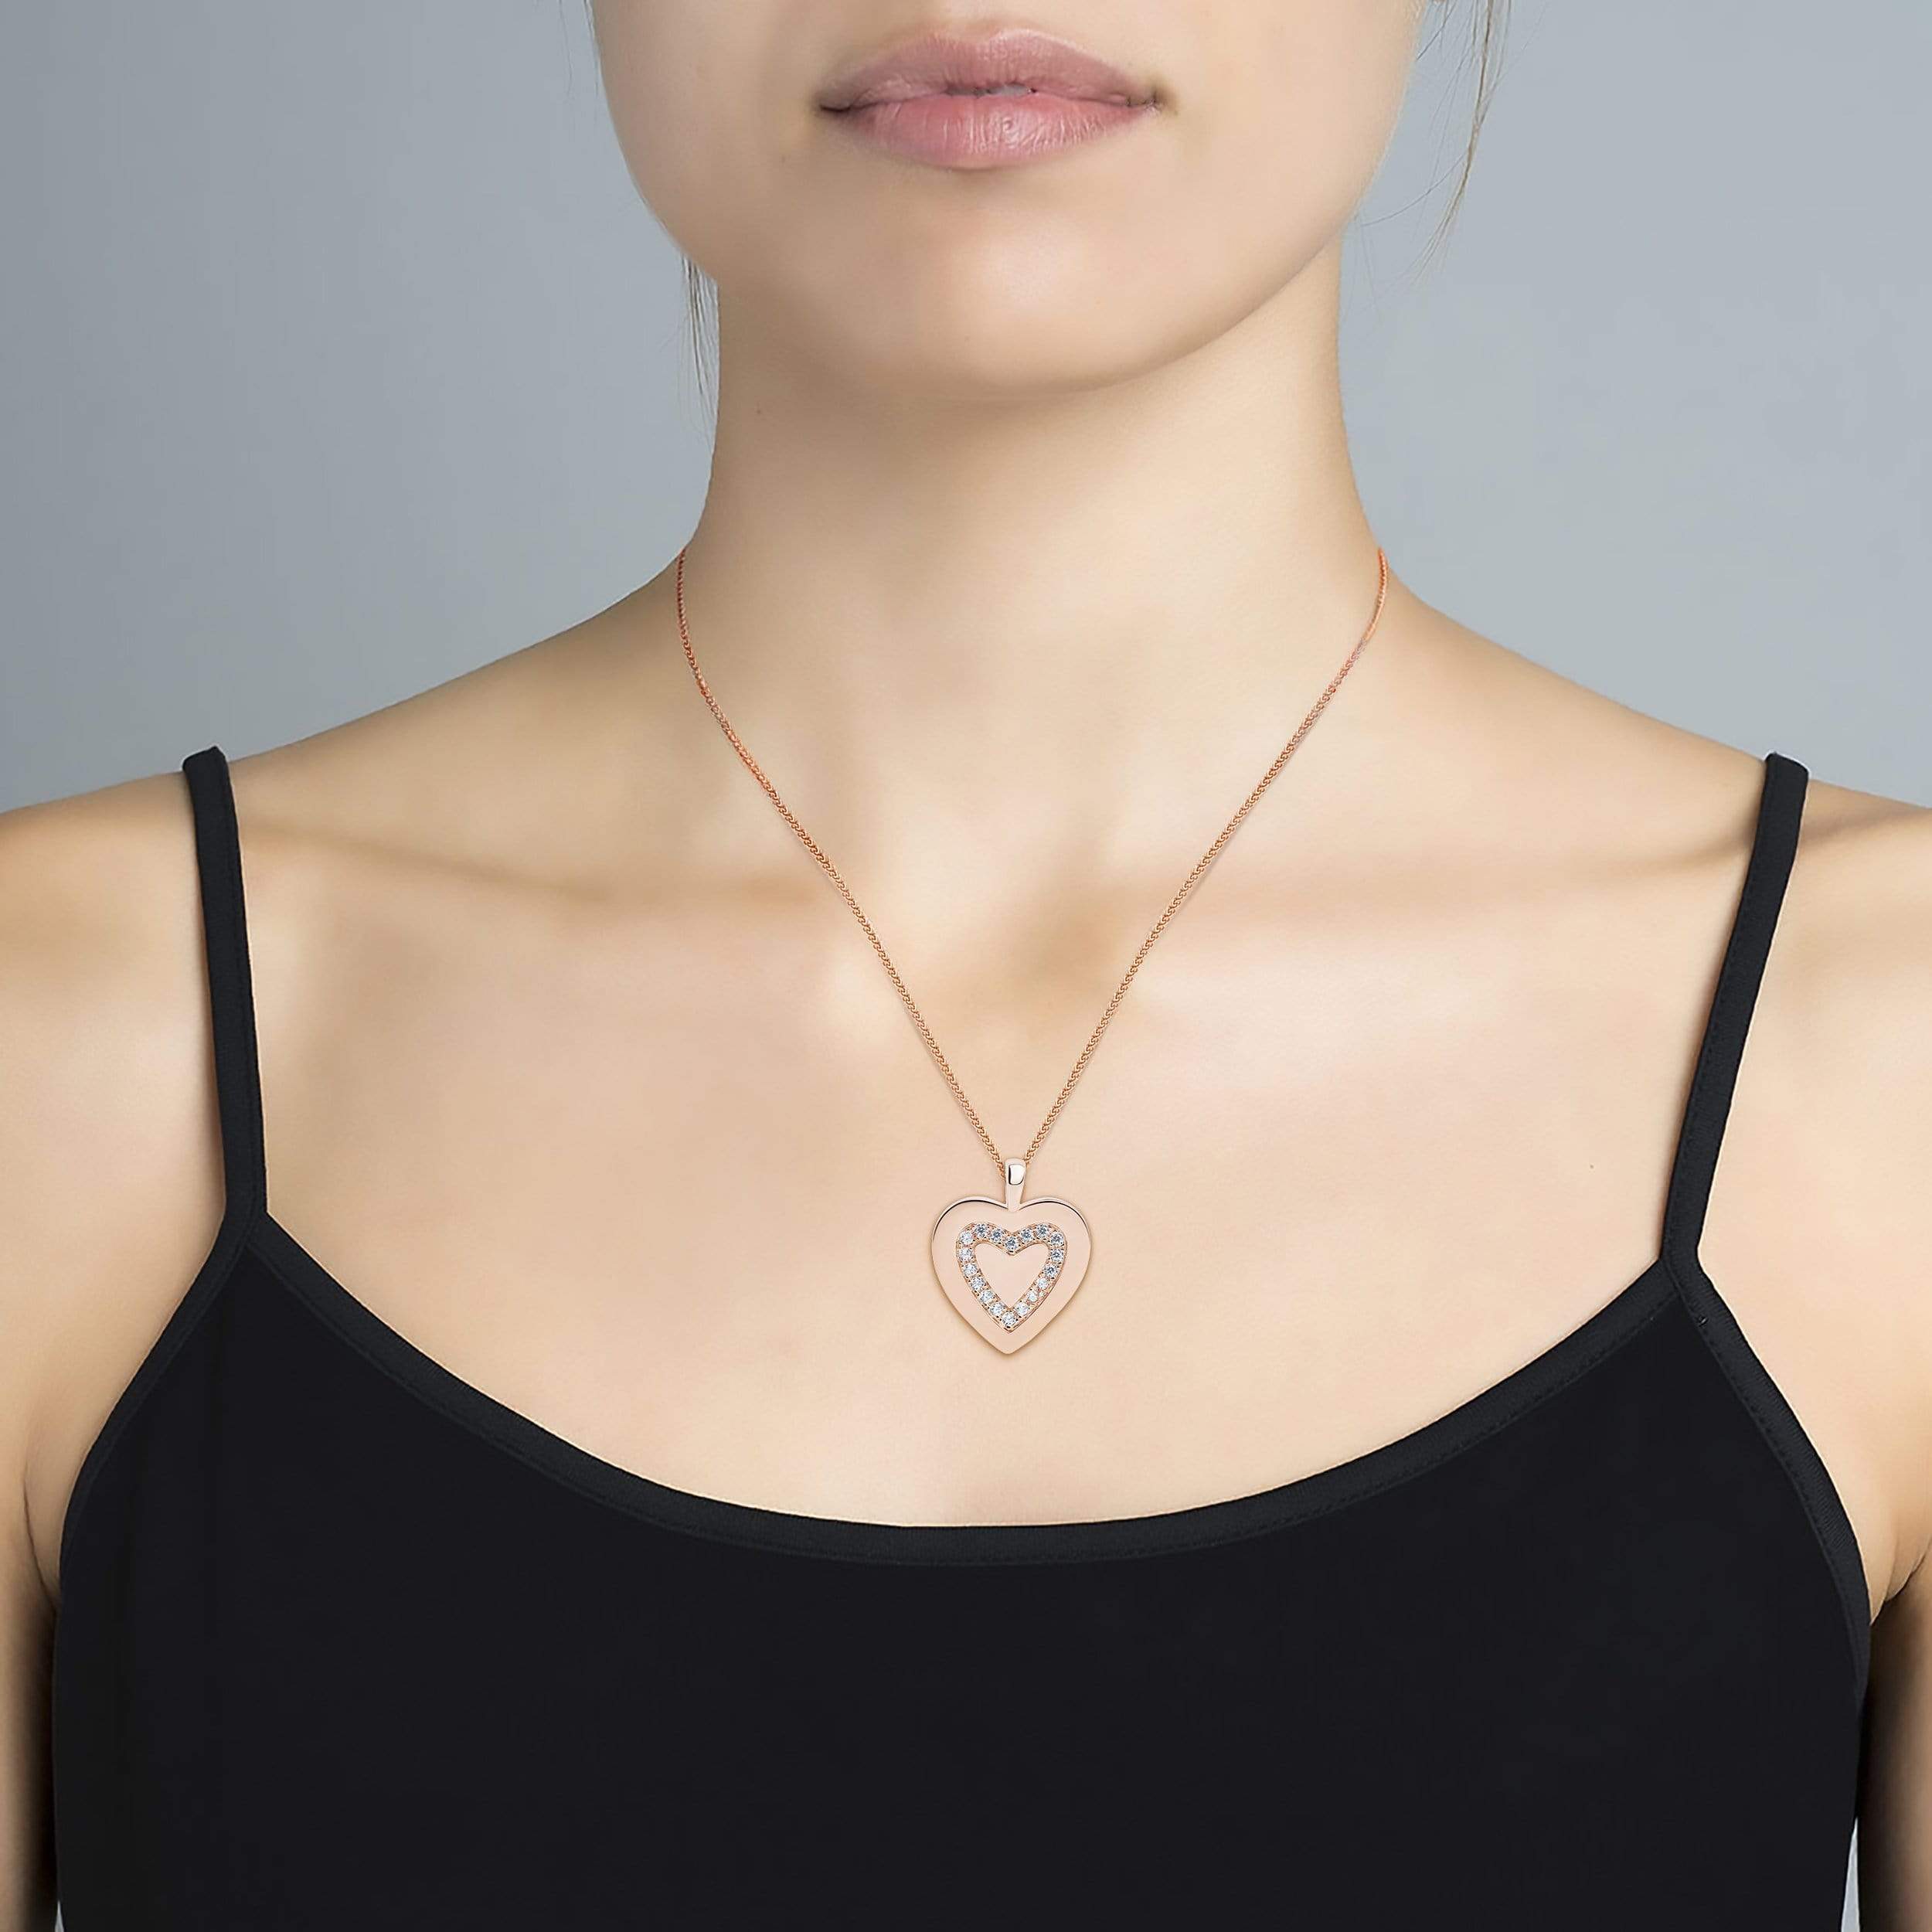 Lynora Jewellery Necklace 18" adj / Rose Gold Plate / Clear Heart Detail Pendant Rose Gold Plate